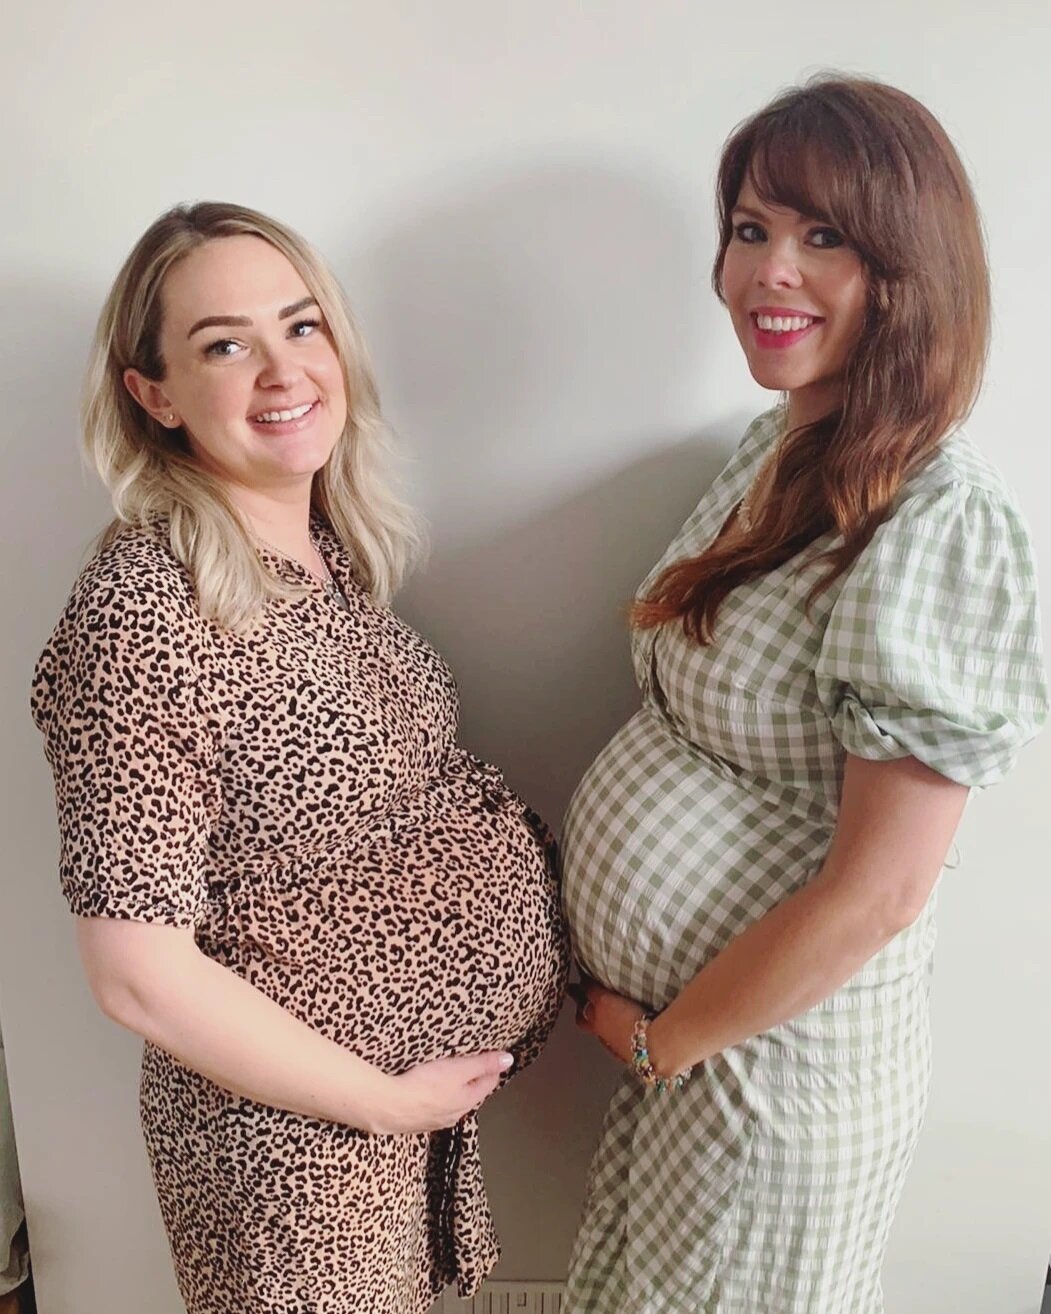 (Bump) Buddies For Life ❤️ Having basically known this one since birth, it feels pretty special that our little ones are due just weeks apart! #bumpbuds